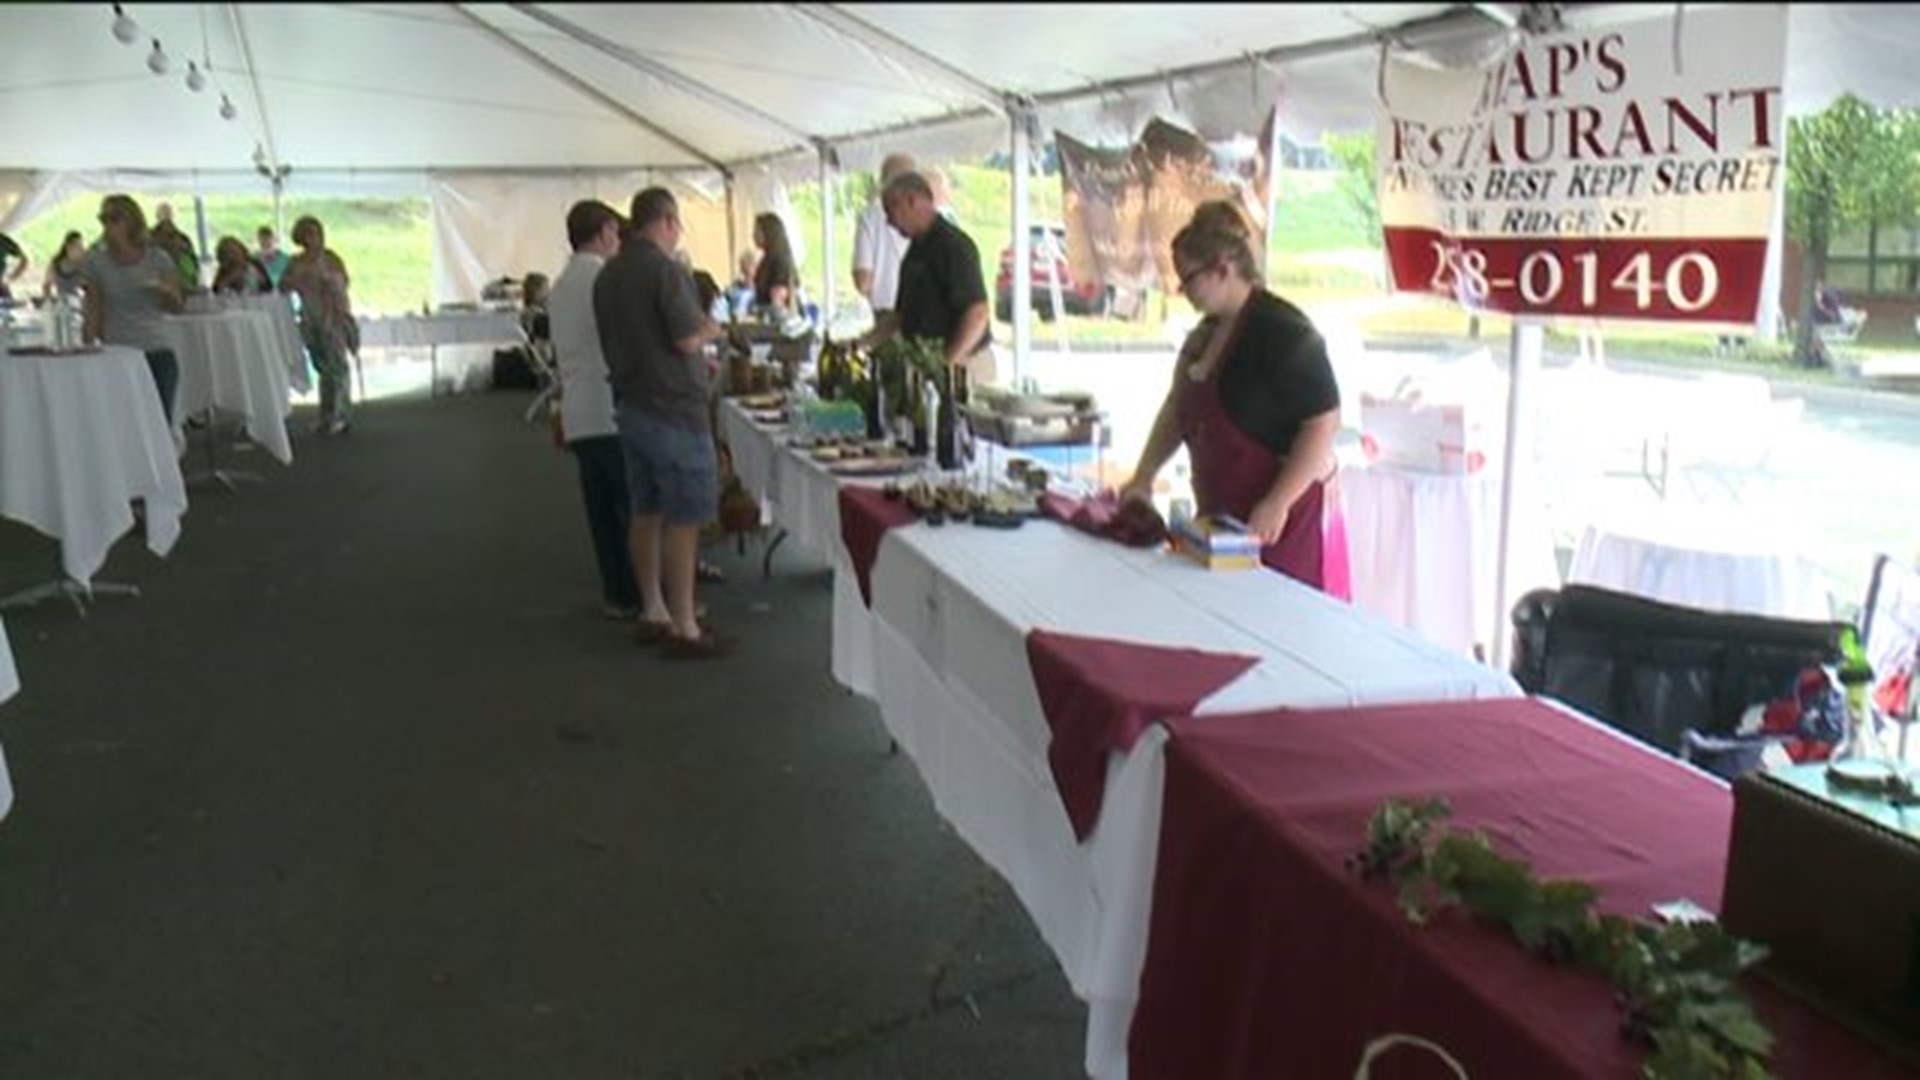 Event Held to Benefit Library in Luzerne County